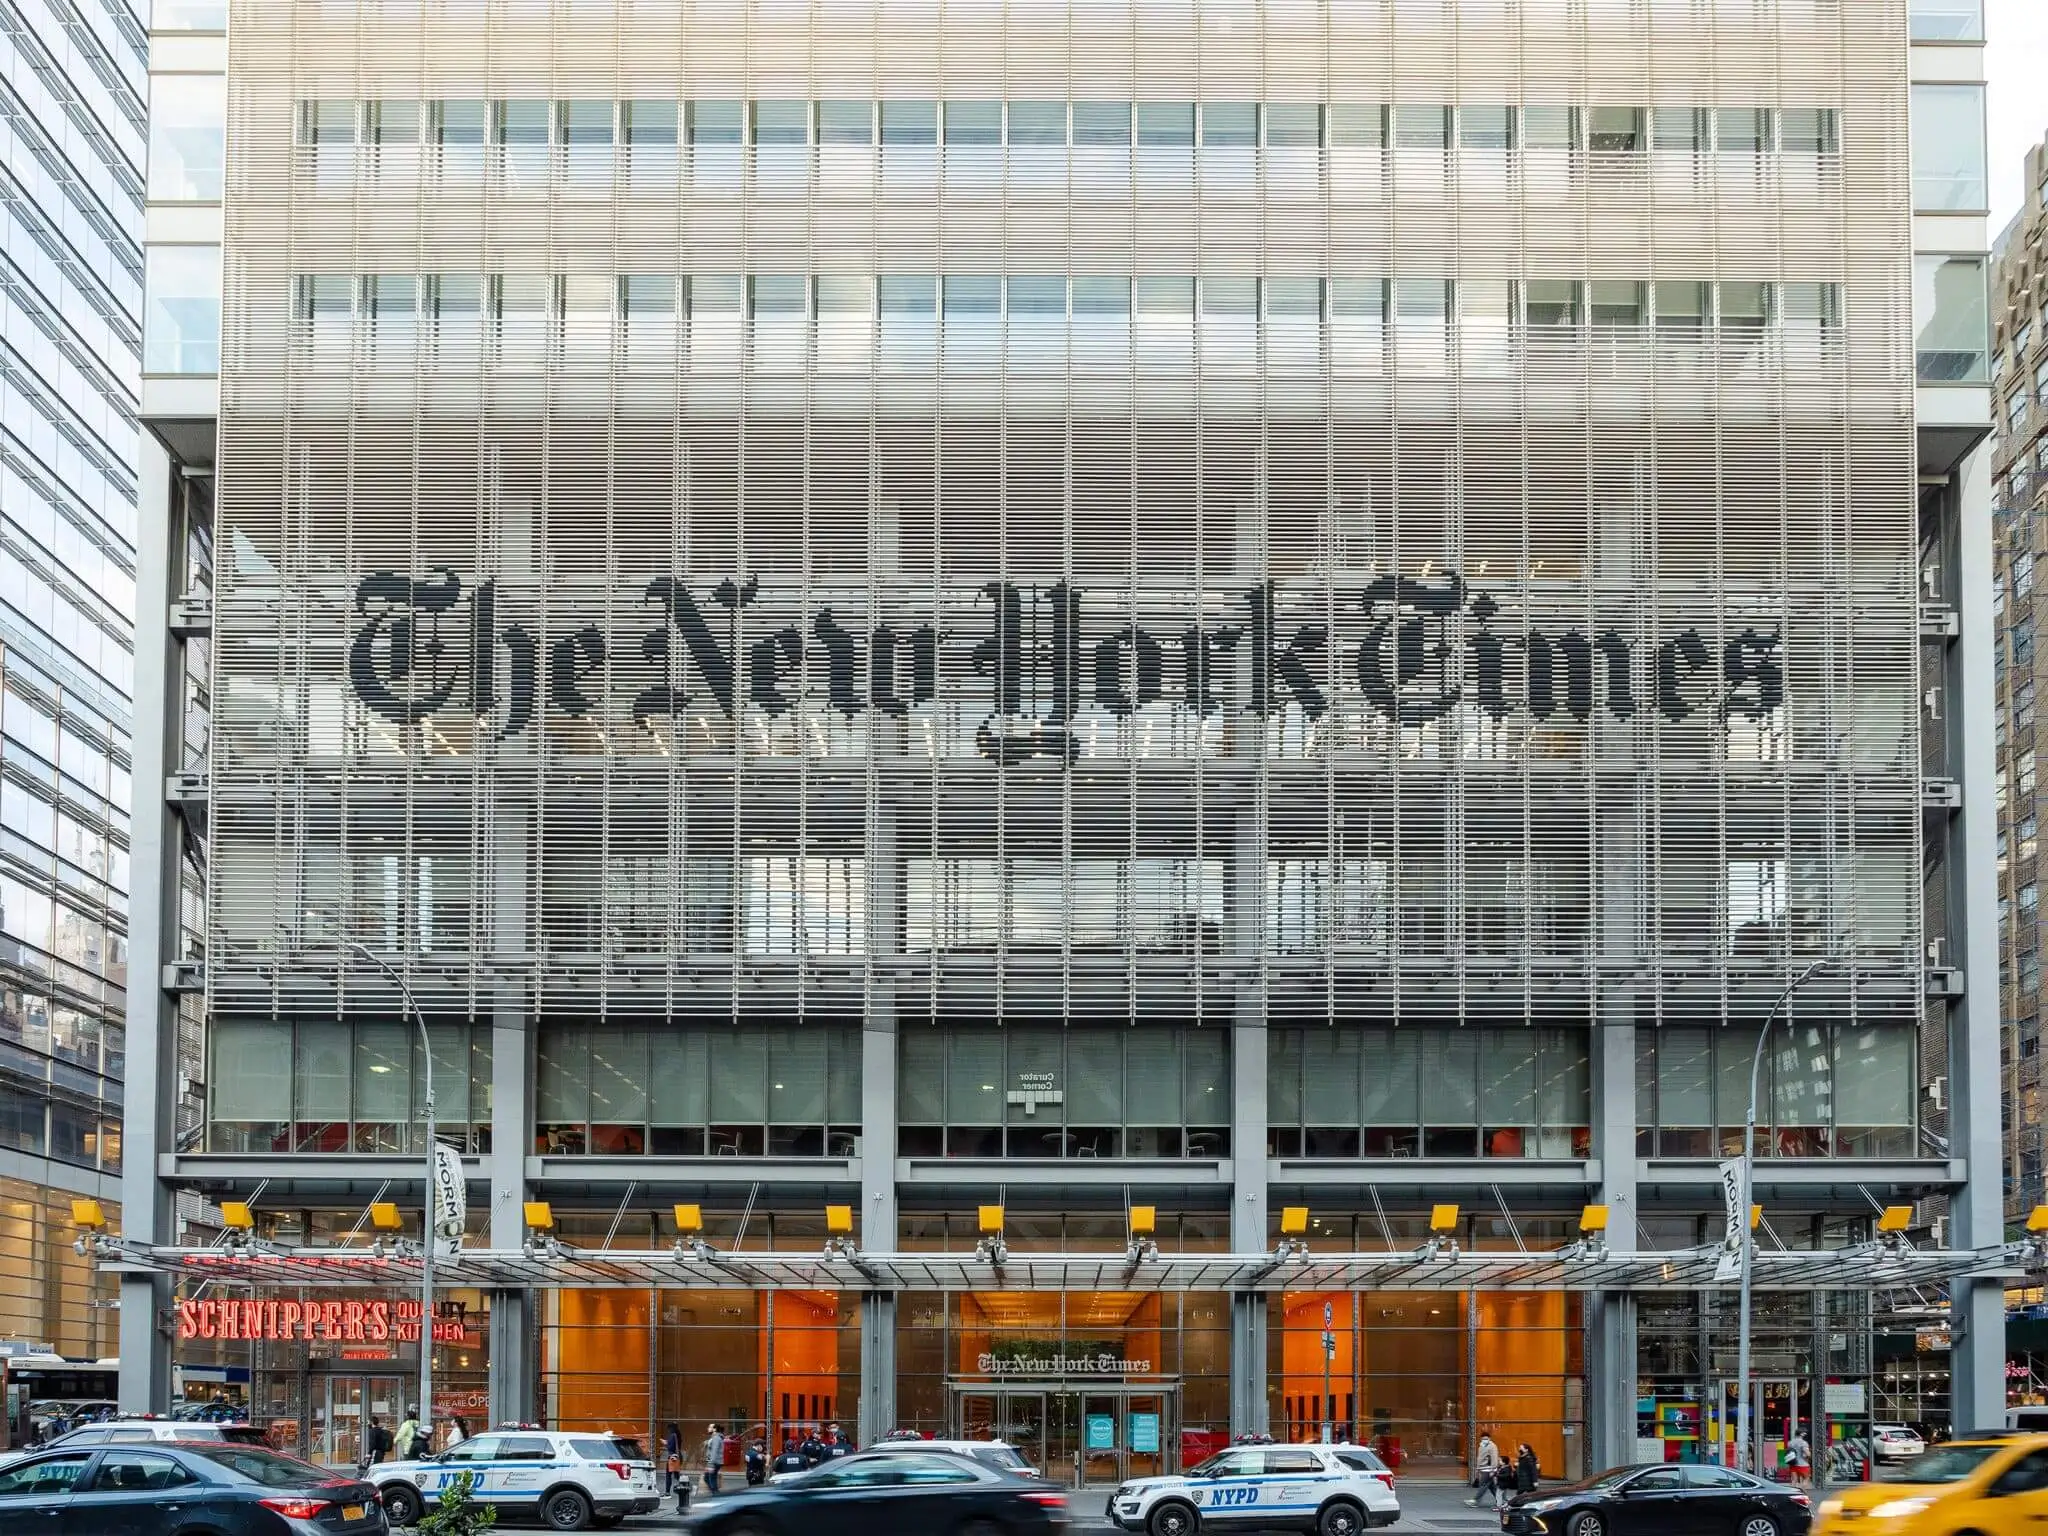 New York Times Source Code Compromised via Exposed GitHub Token